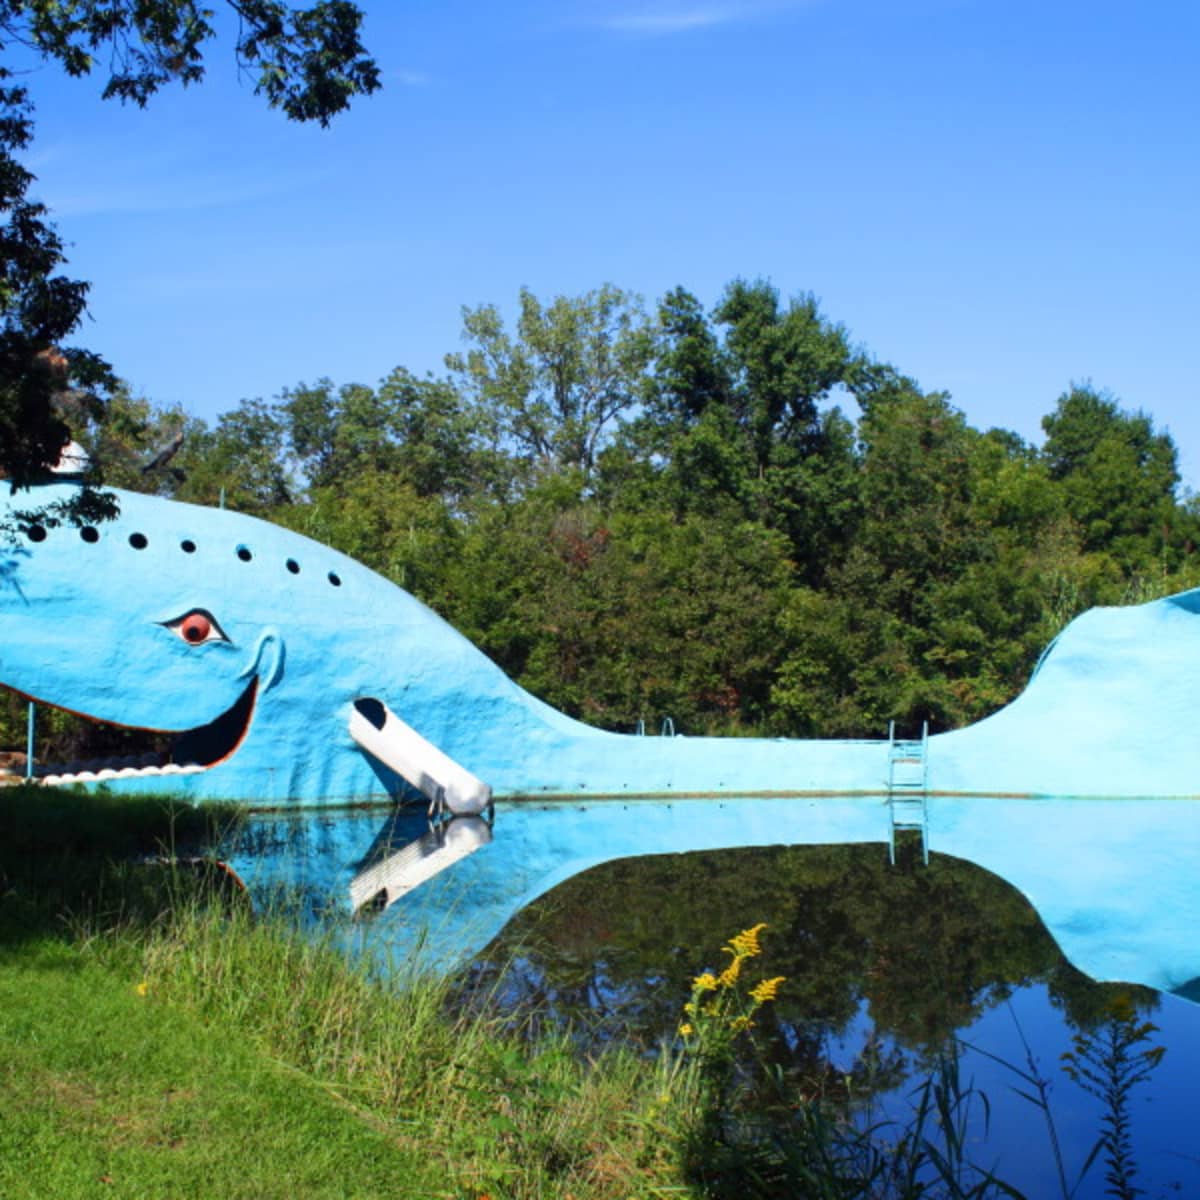 History of the Blue Whale of Catoosa: An Oklahoma Whale of a Tale